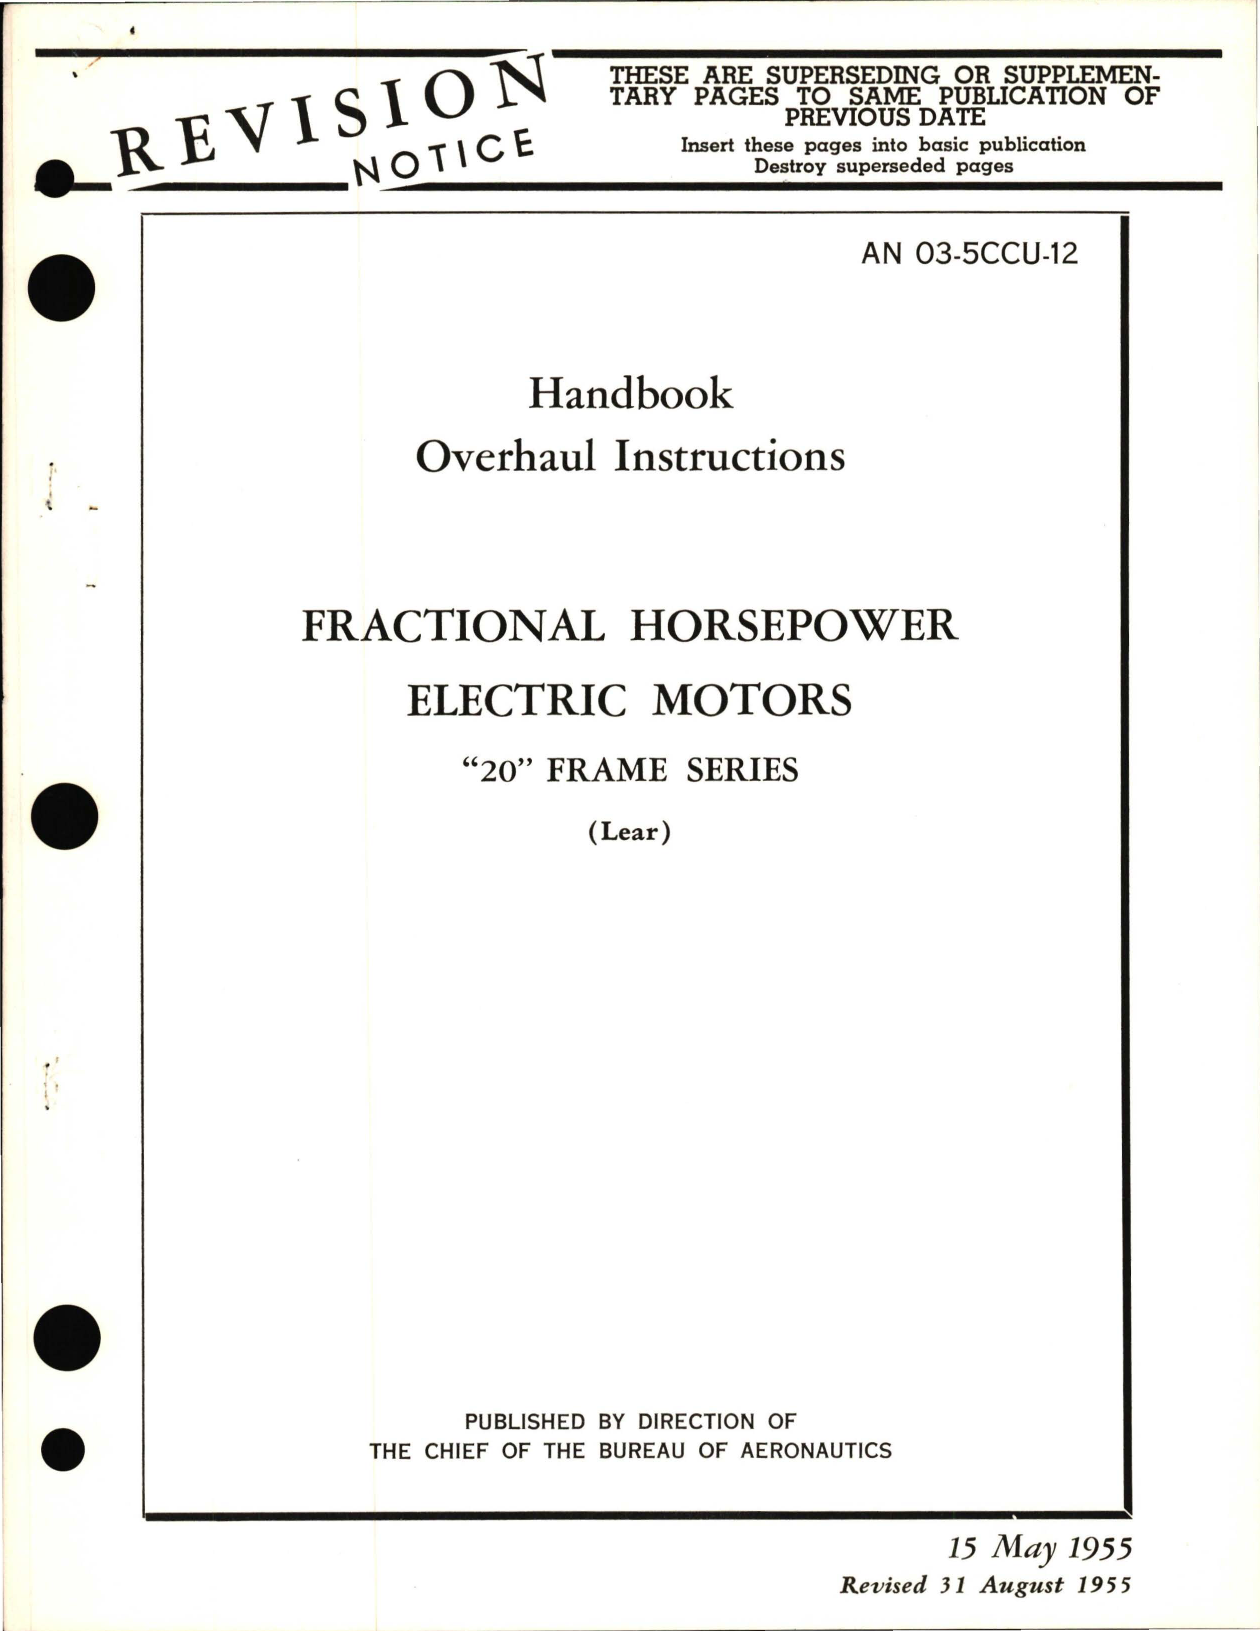 Sample page 9 from AirCorps Library document: Overhaul Instructions for Fractional Horsepower Electric Motors - 20 Frame Series